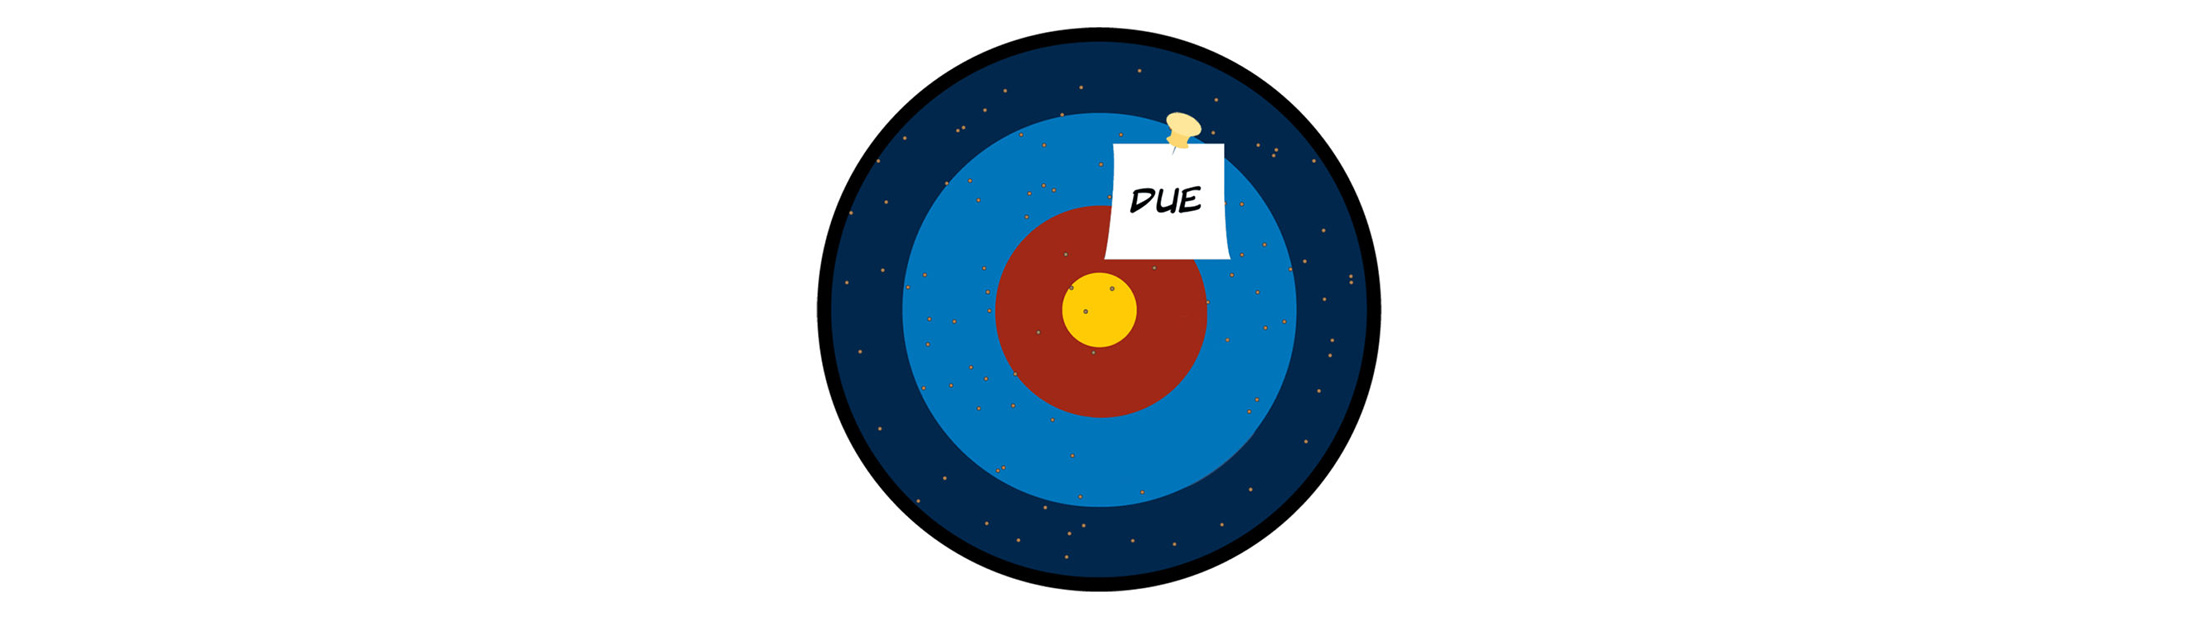 A cartoon of a bullseye with a piece of paper labelled "Due" on it.